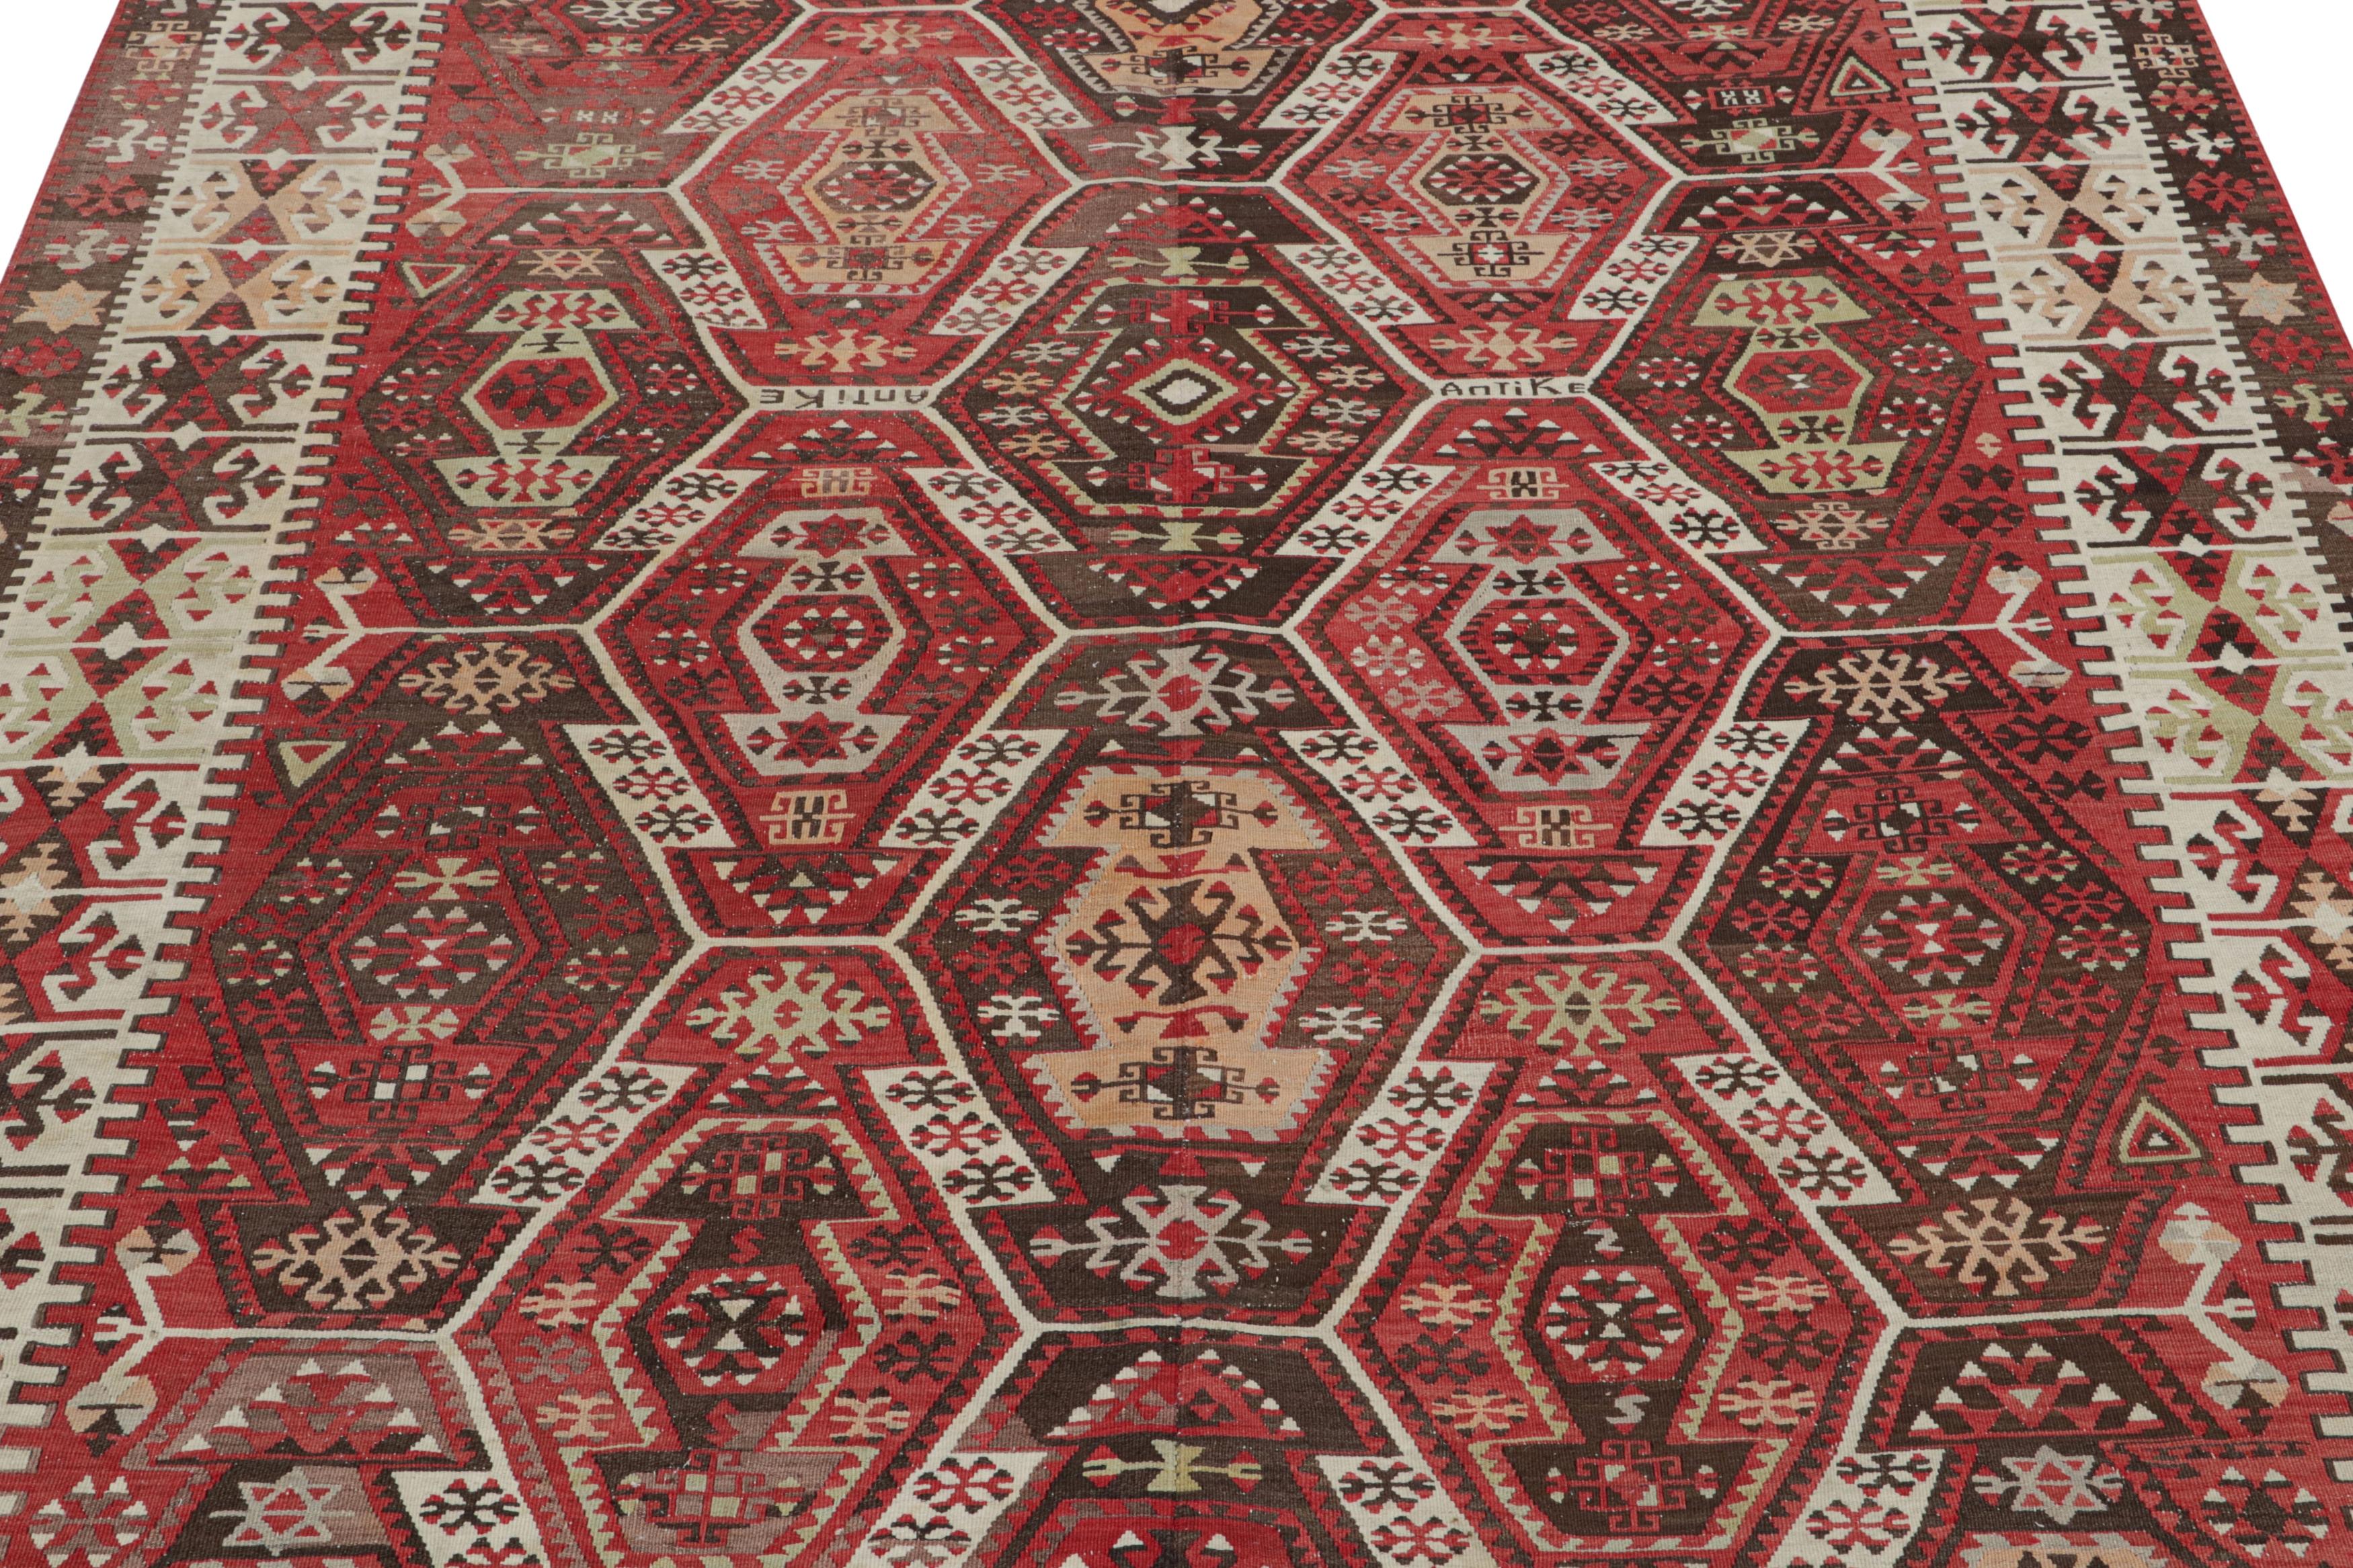 Originating from Turkey between 1930-1950, this vintage Kayseri wool Kilim rug enjoys a classical sense of symmetry in a beautiful large-scale graph complementing the marriage of forgiving and rich colorways. Flat-woven in high-quality wool with